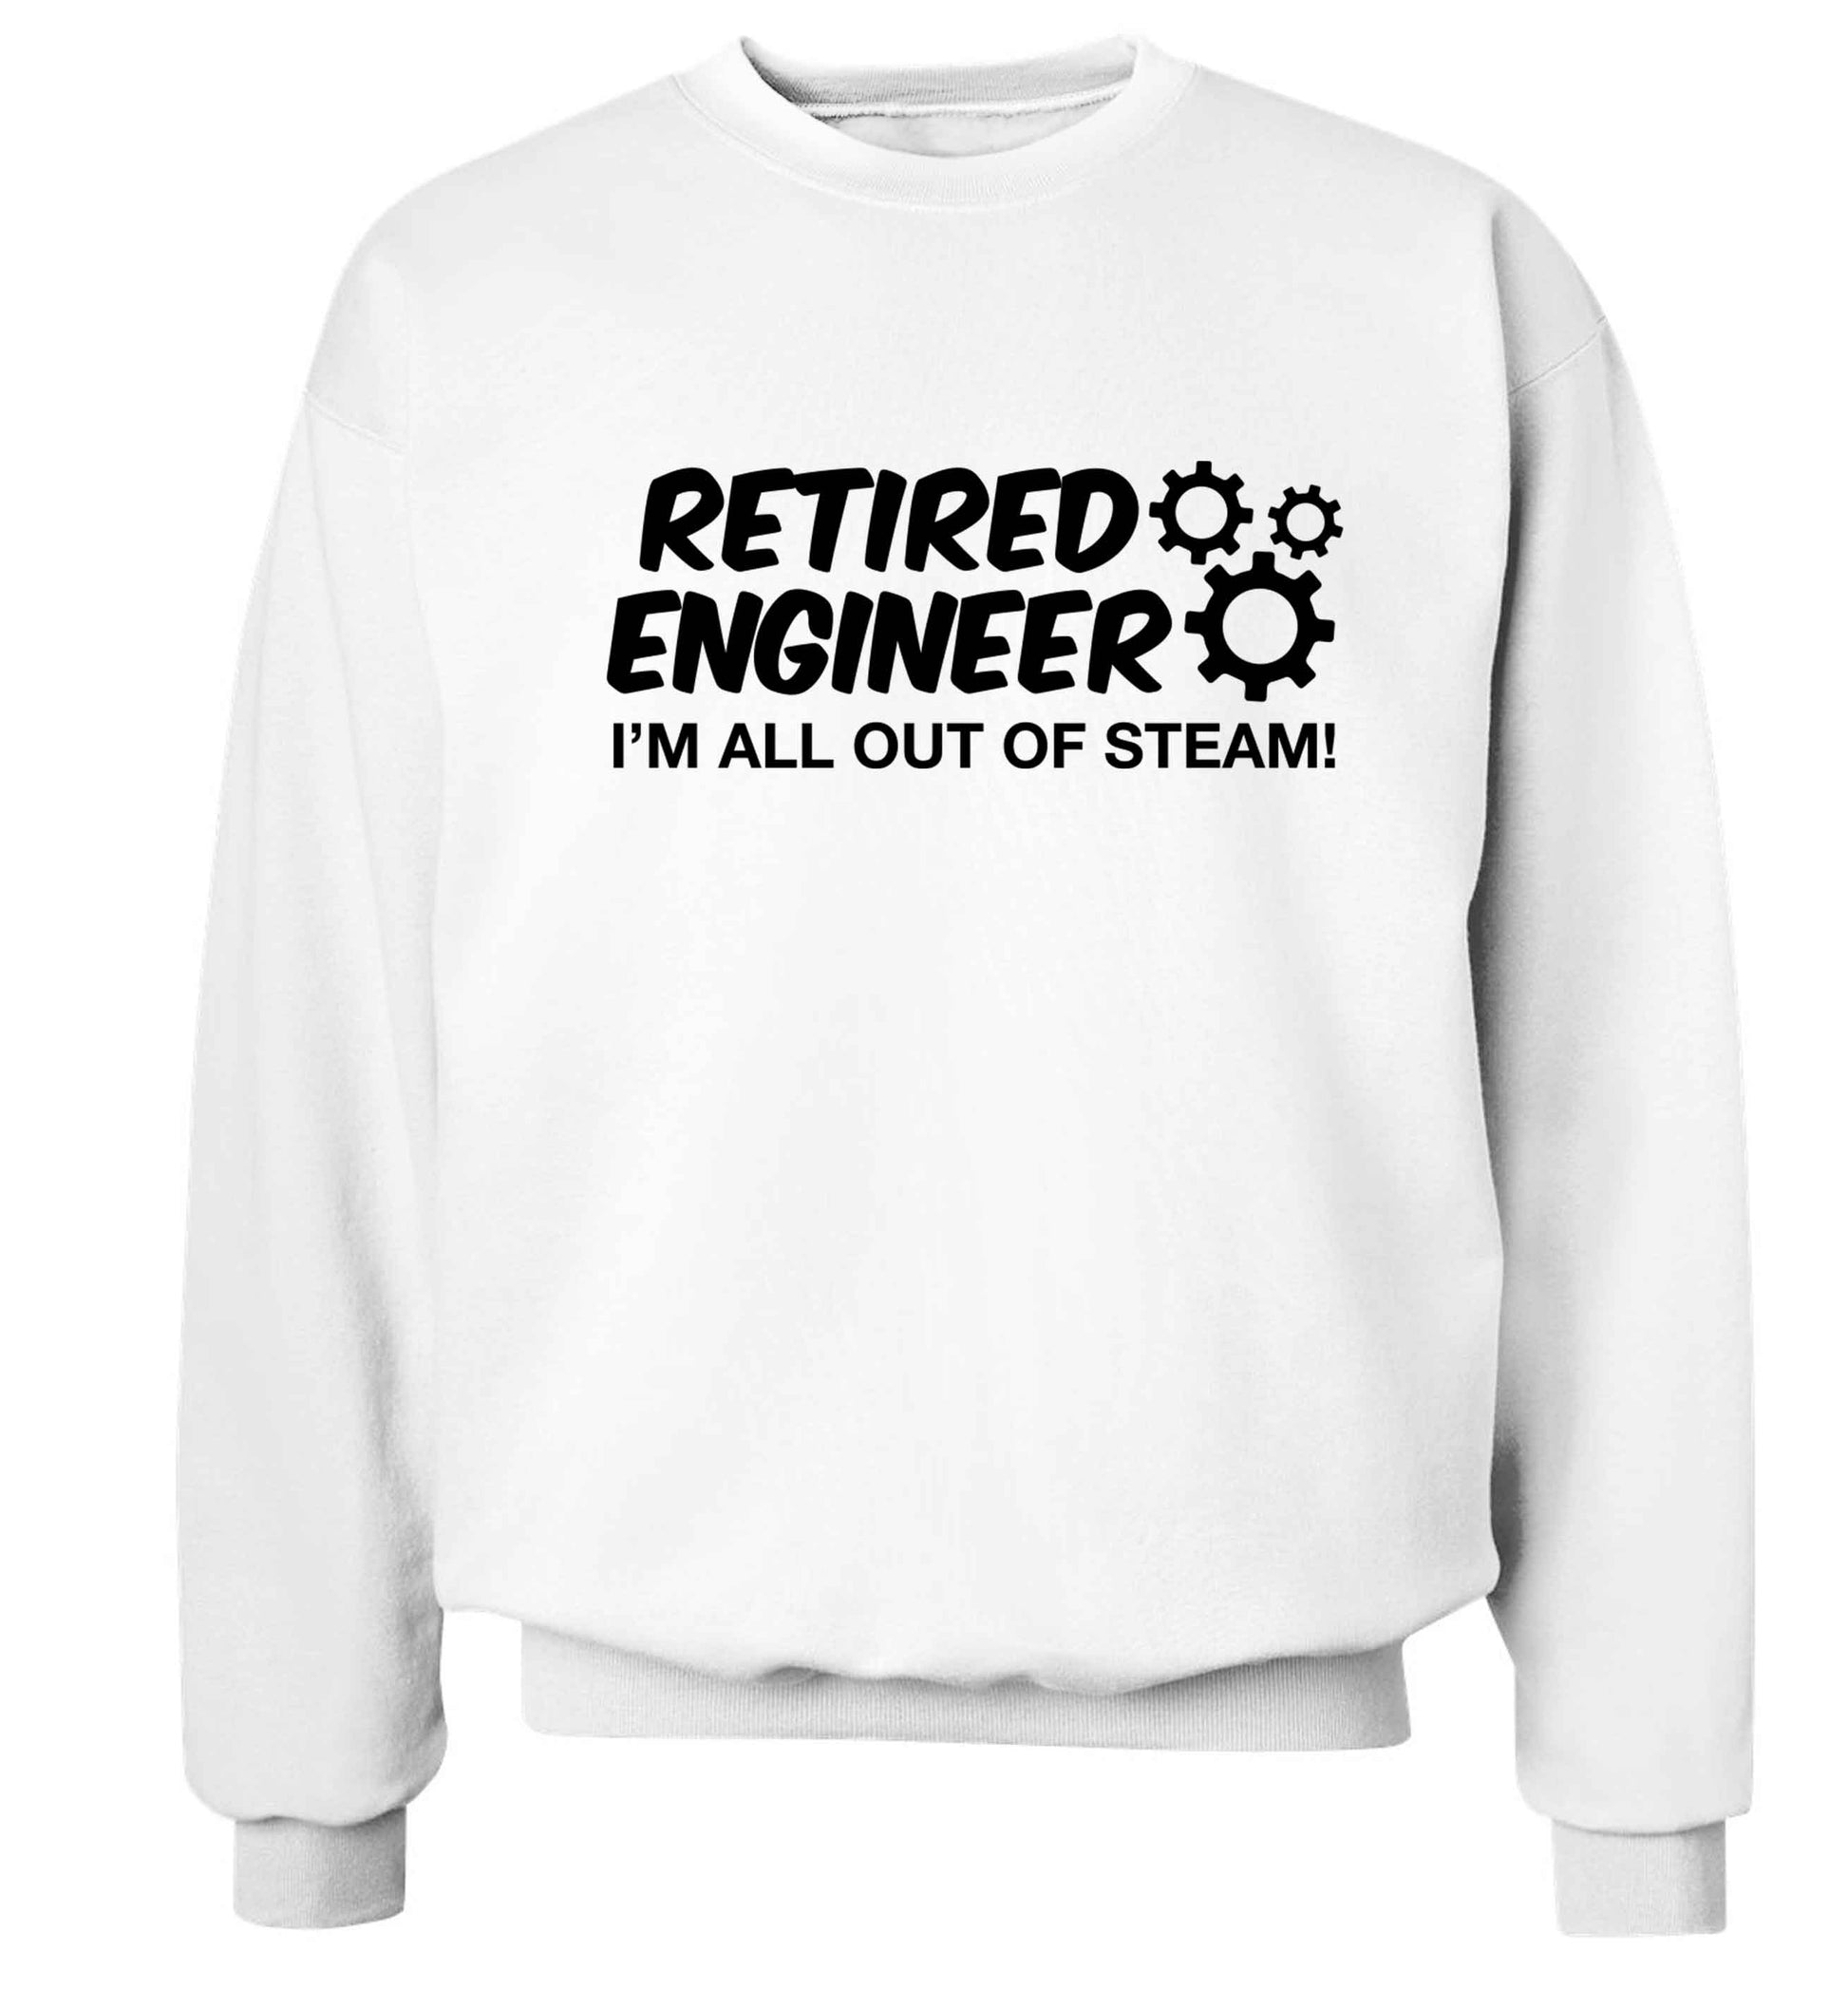 Retired engineer I'm all out of steam Adult's unisex white Sweater 2XL